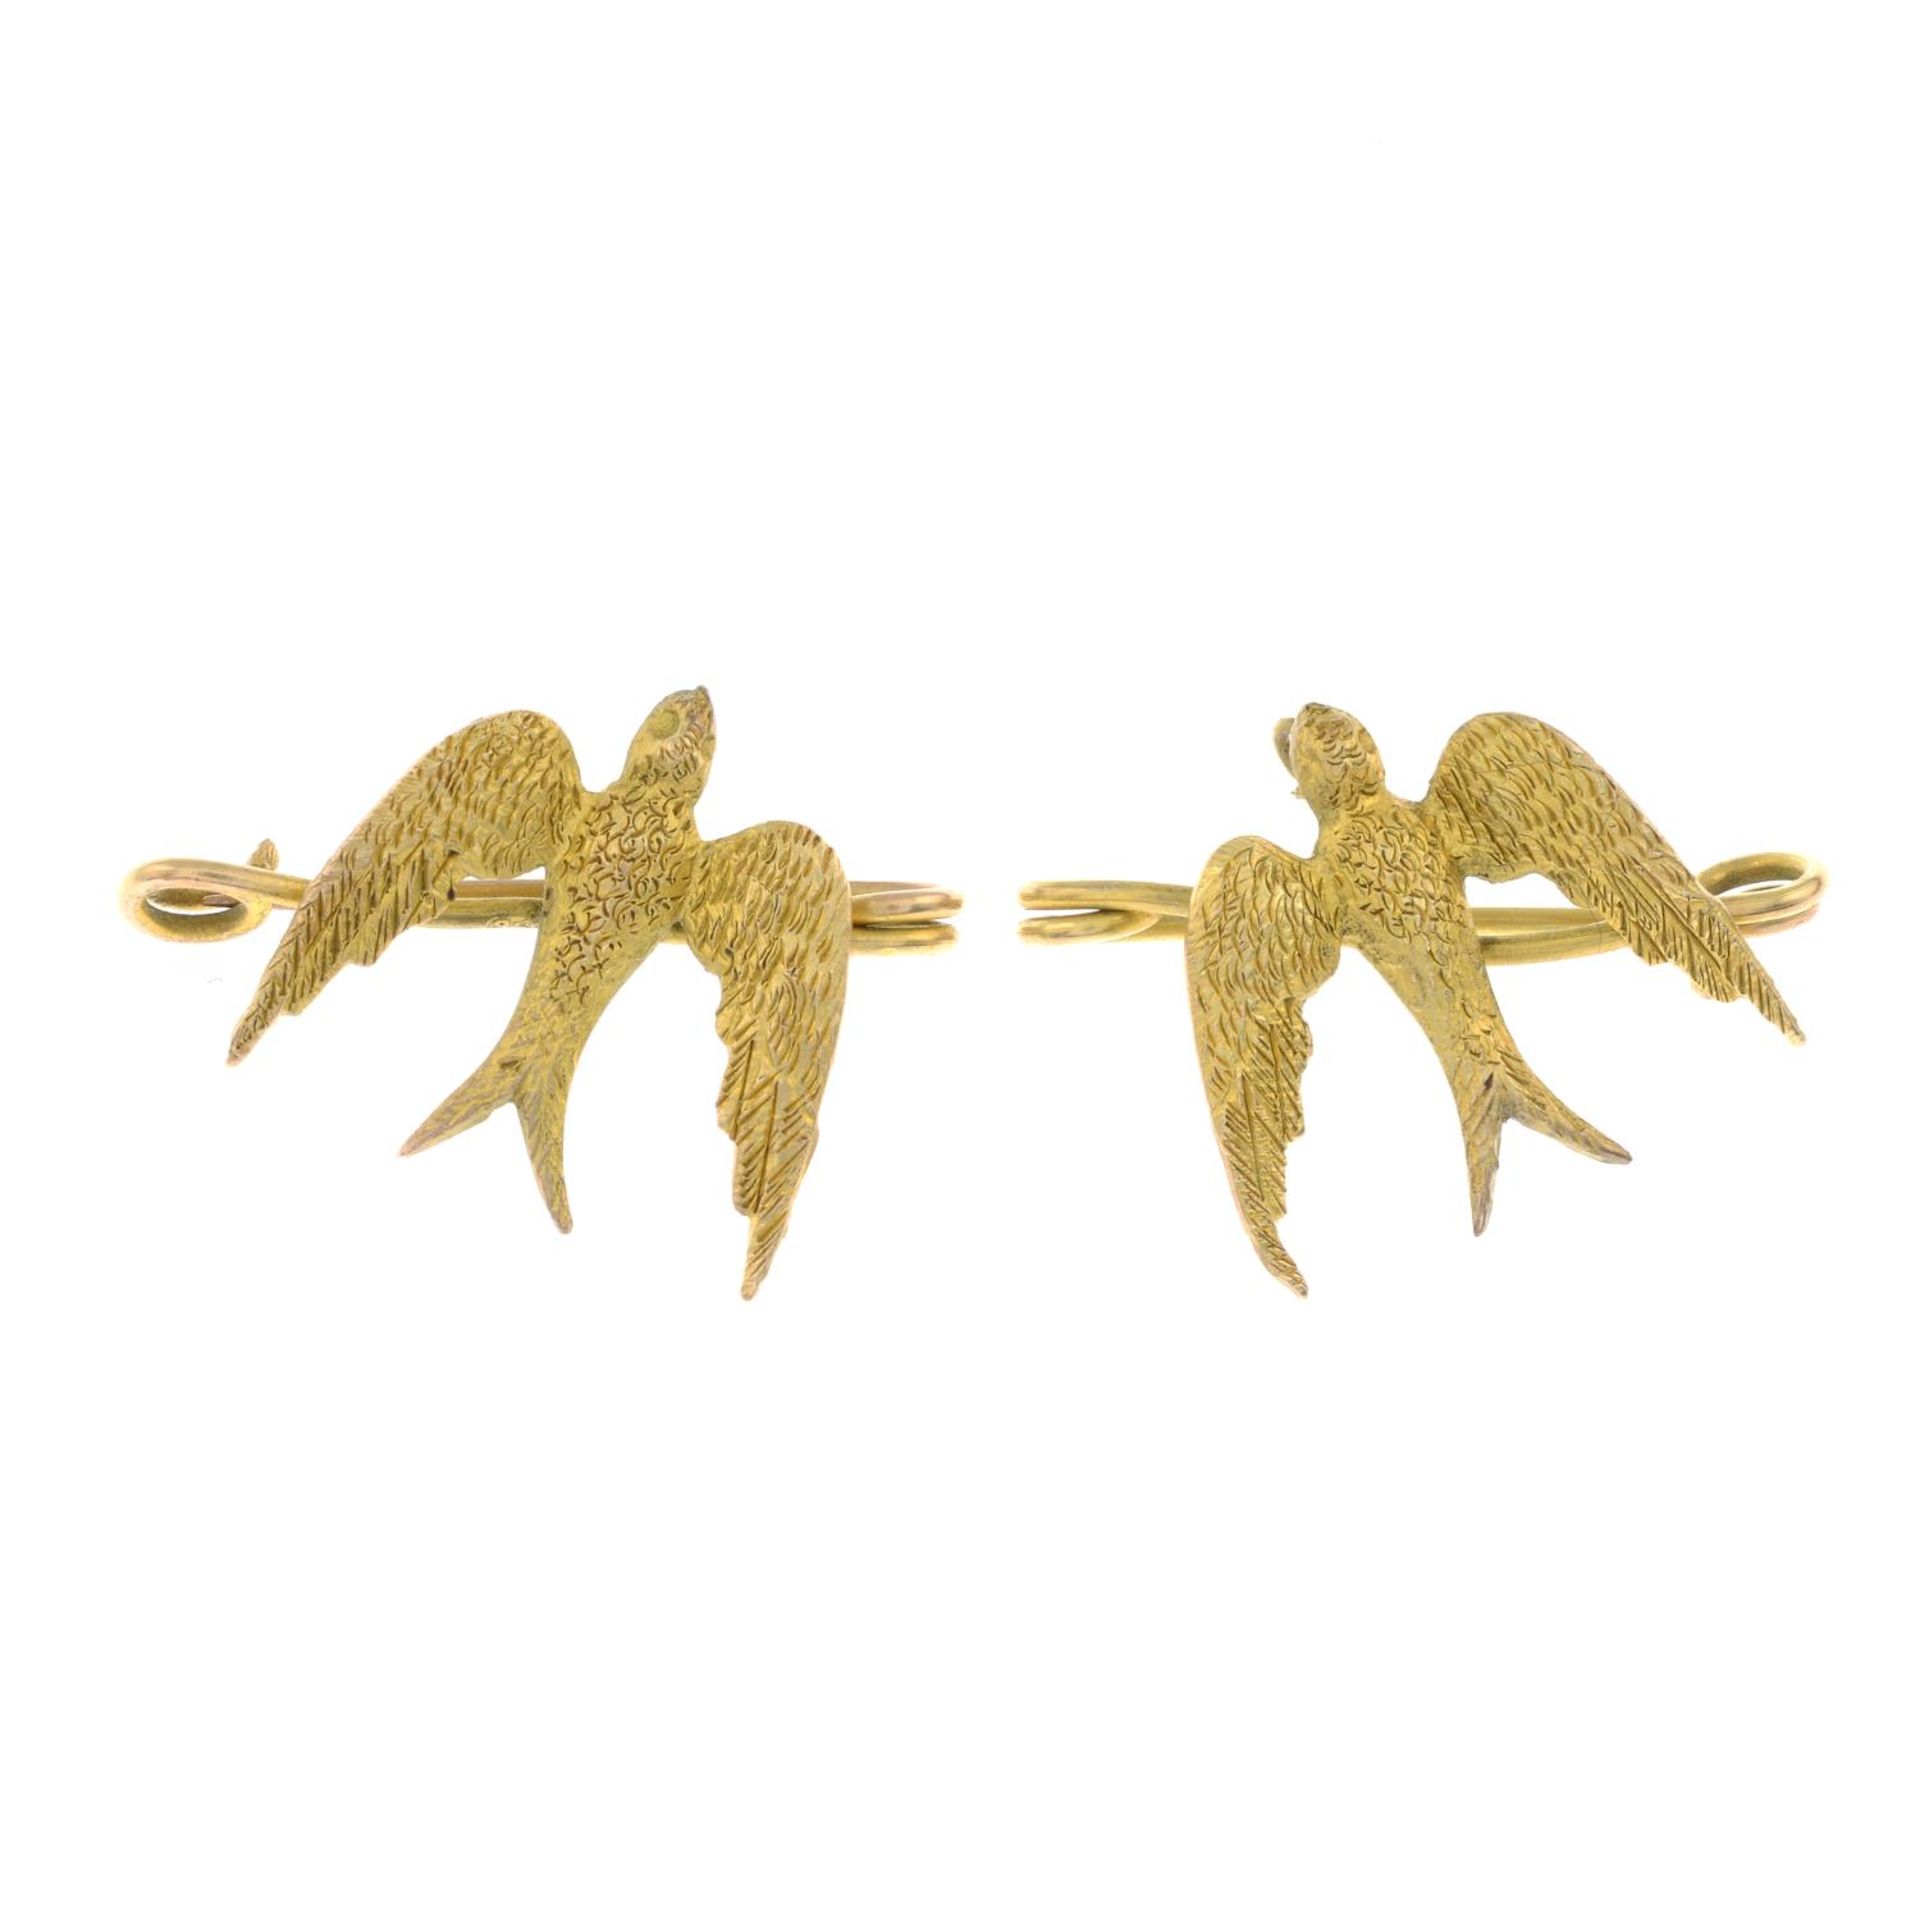 Two swallow brooches.